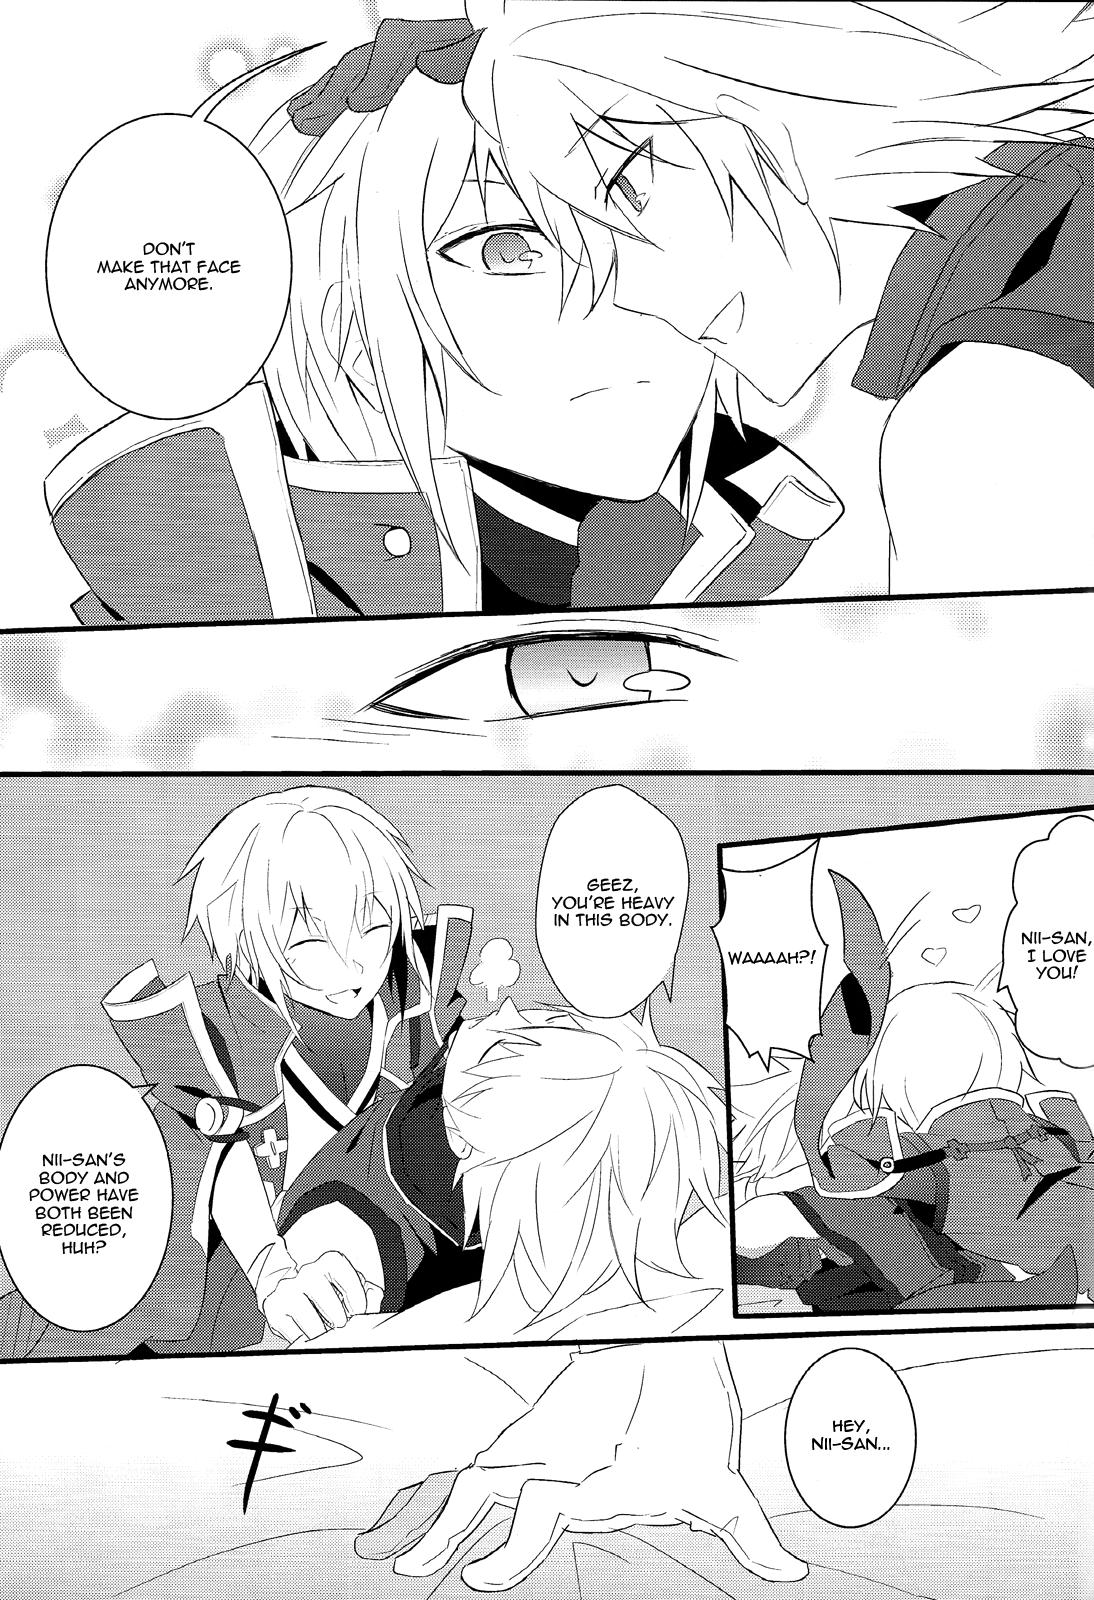 Shoes Taking Back Time - Blazblue Camporn - Page 10